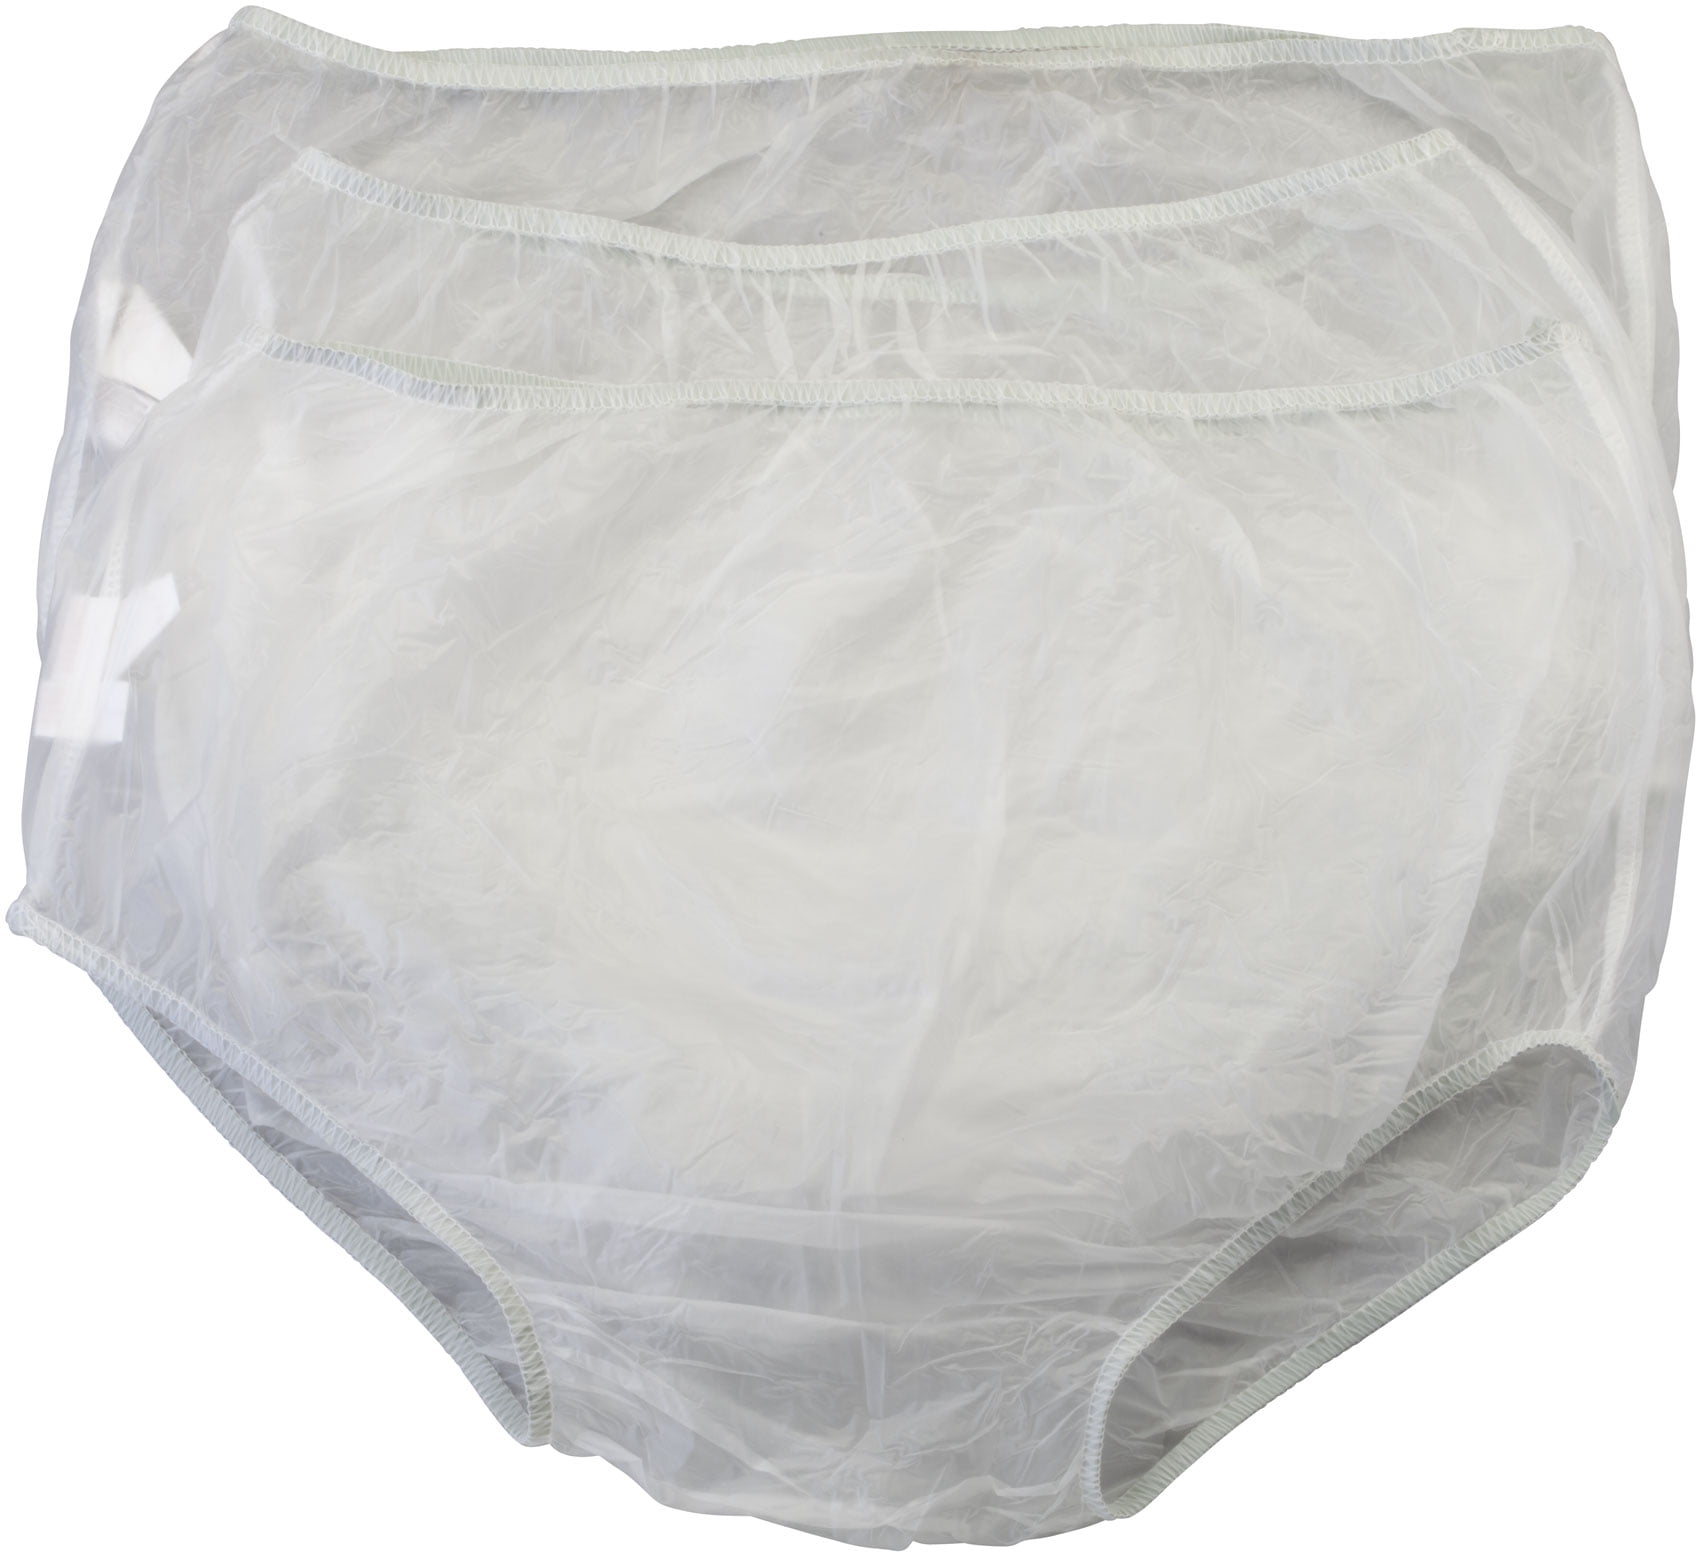 Materials in Incontinence Underwear  Made for Living – Made for living